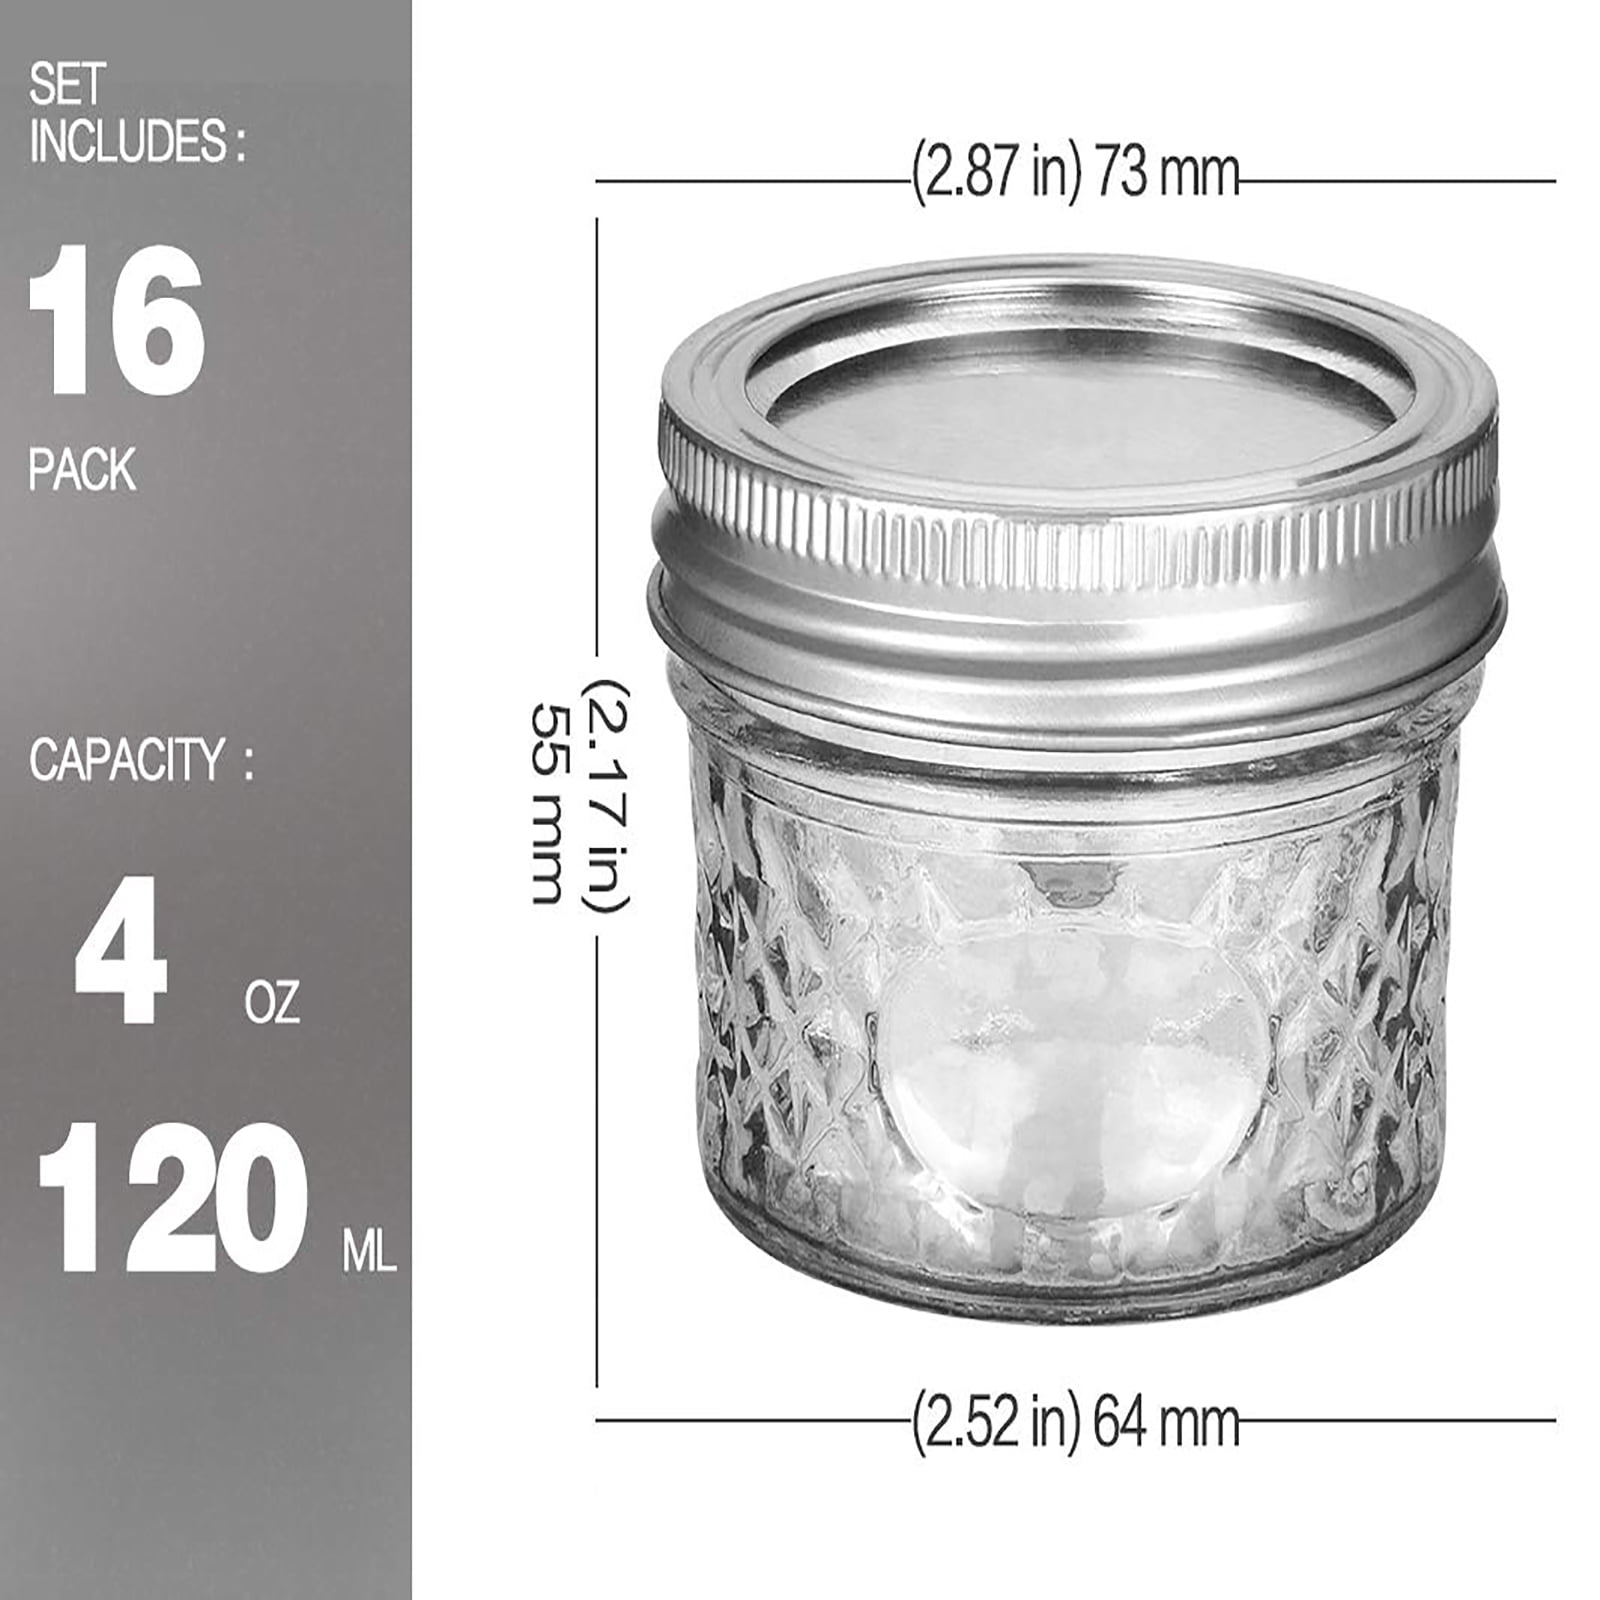  Tanlade 50 Pcs 3 oz Glass Jars with Lids Small Glass Jars Bulk  Mini Hexagon Honey Jars Mason Jars Spice Canning Jars with Gift Bags  Stickers and Tags for Baby Shower